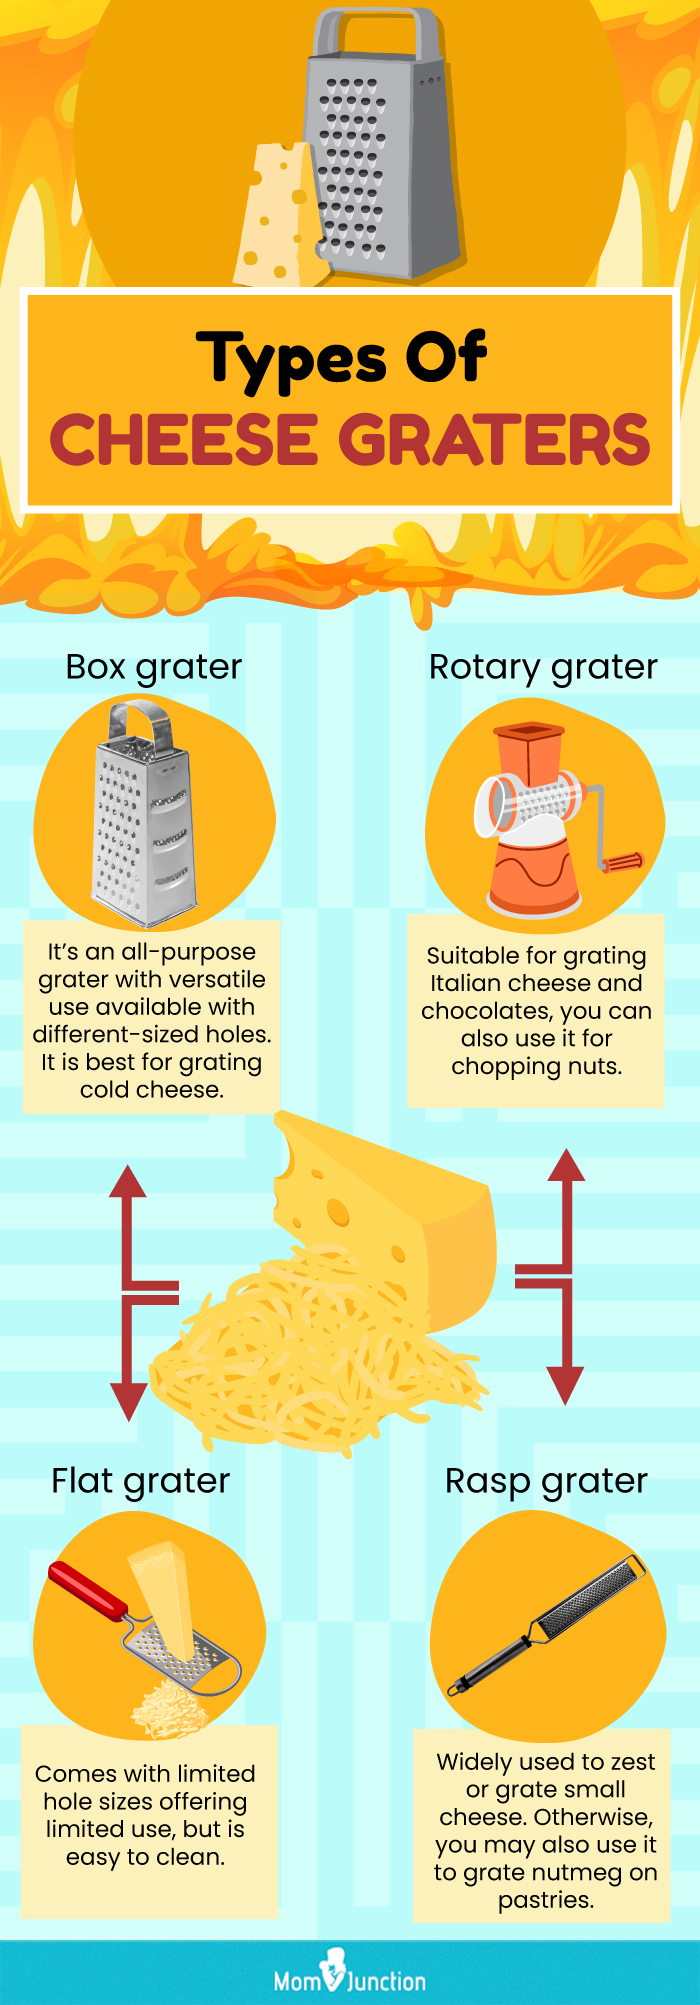 Types Of Cheese Graters